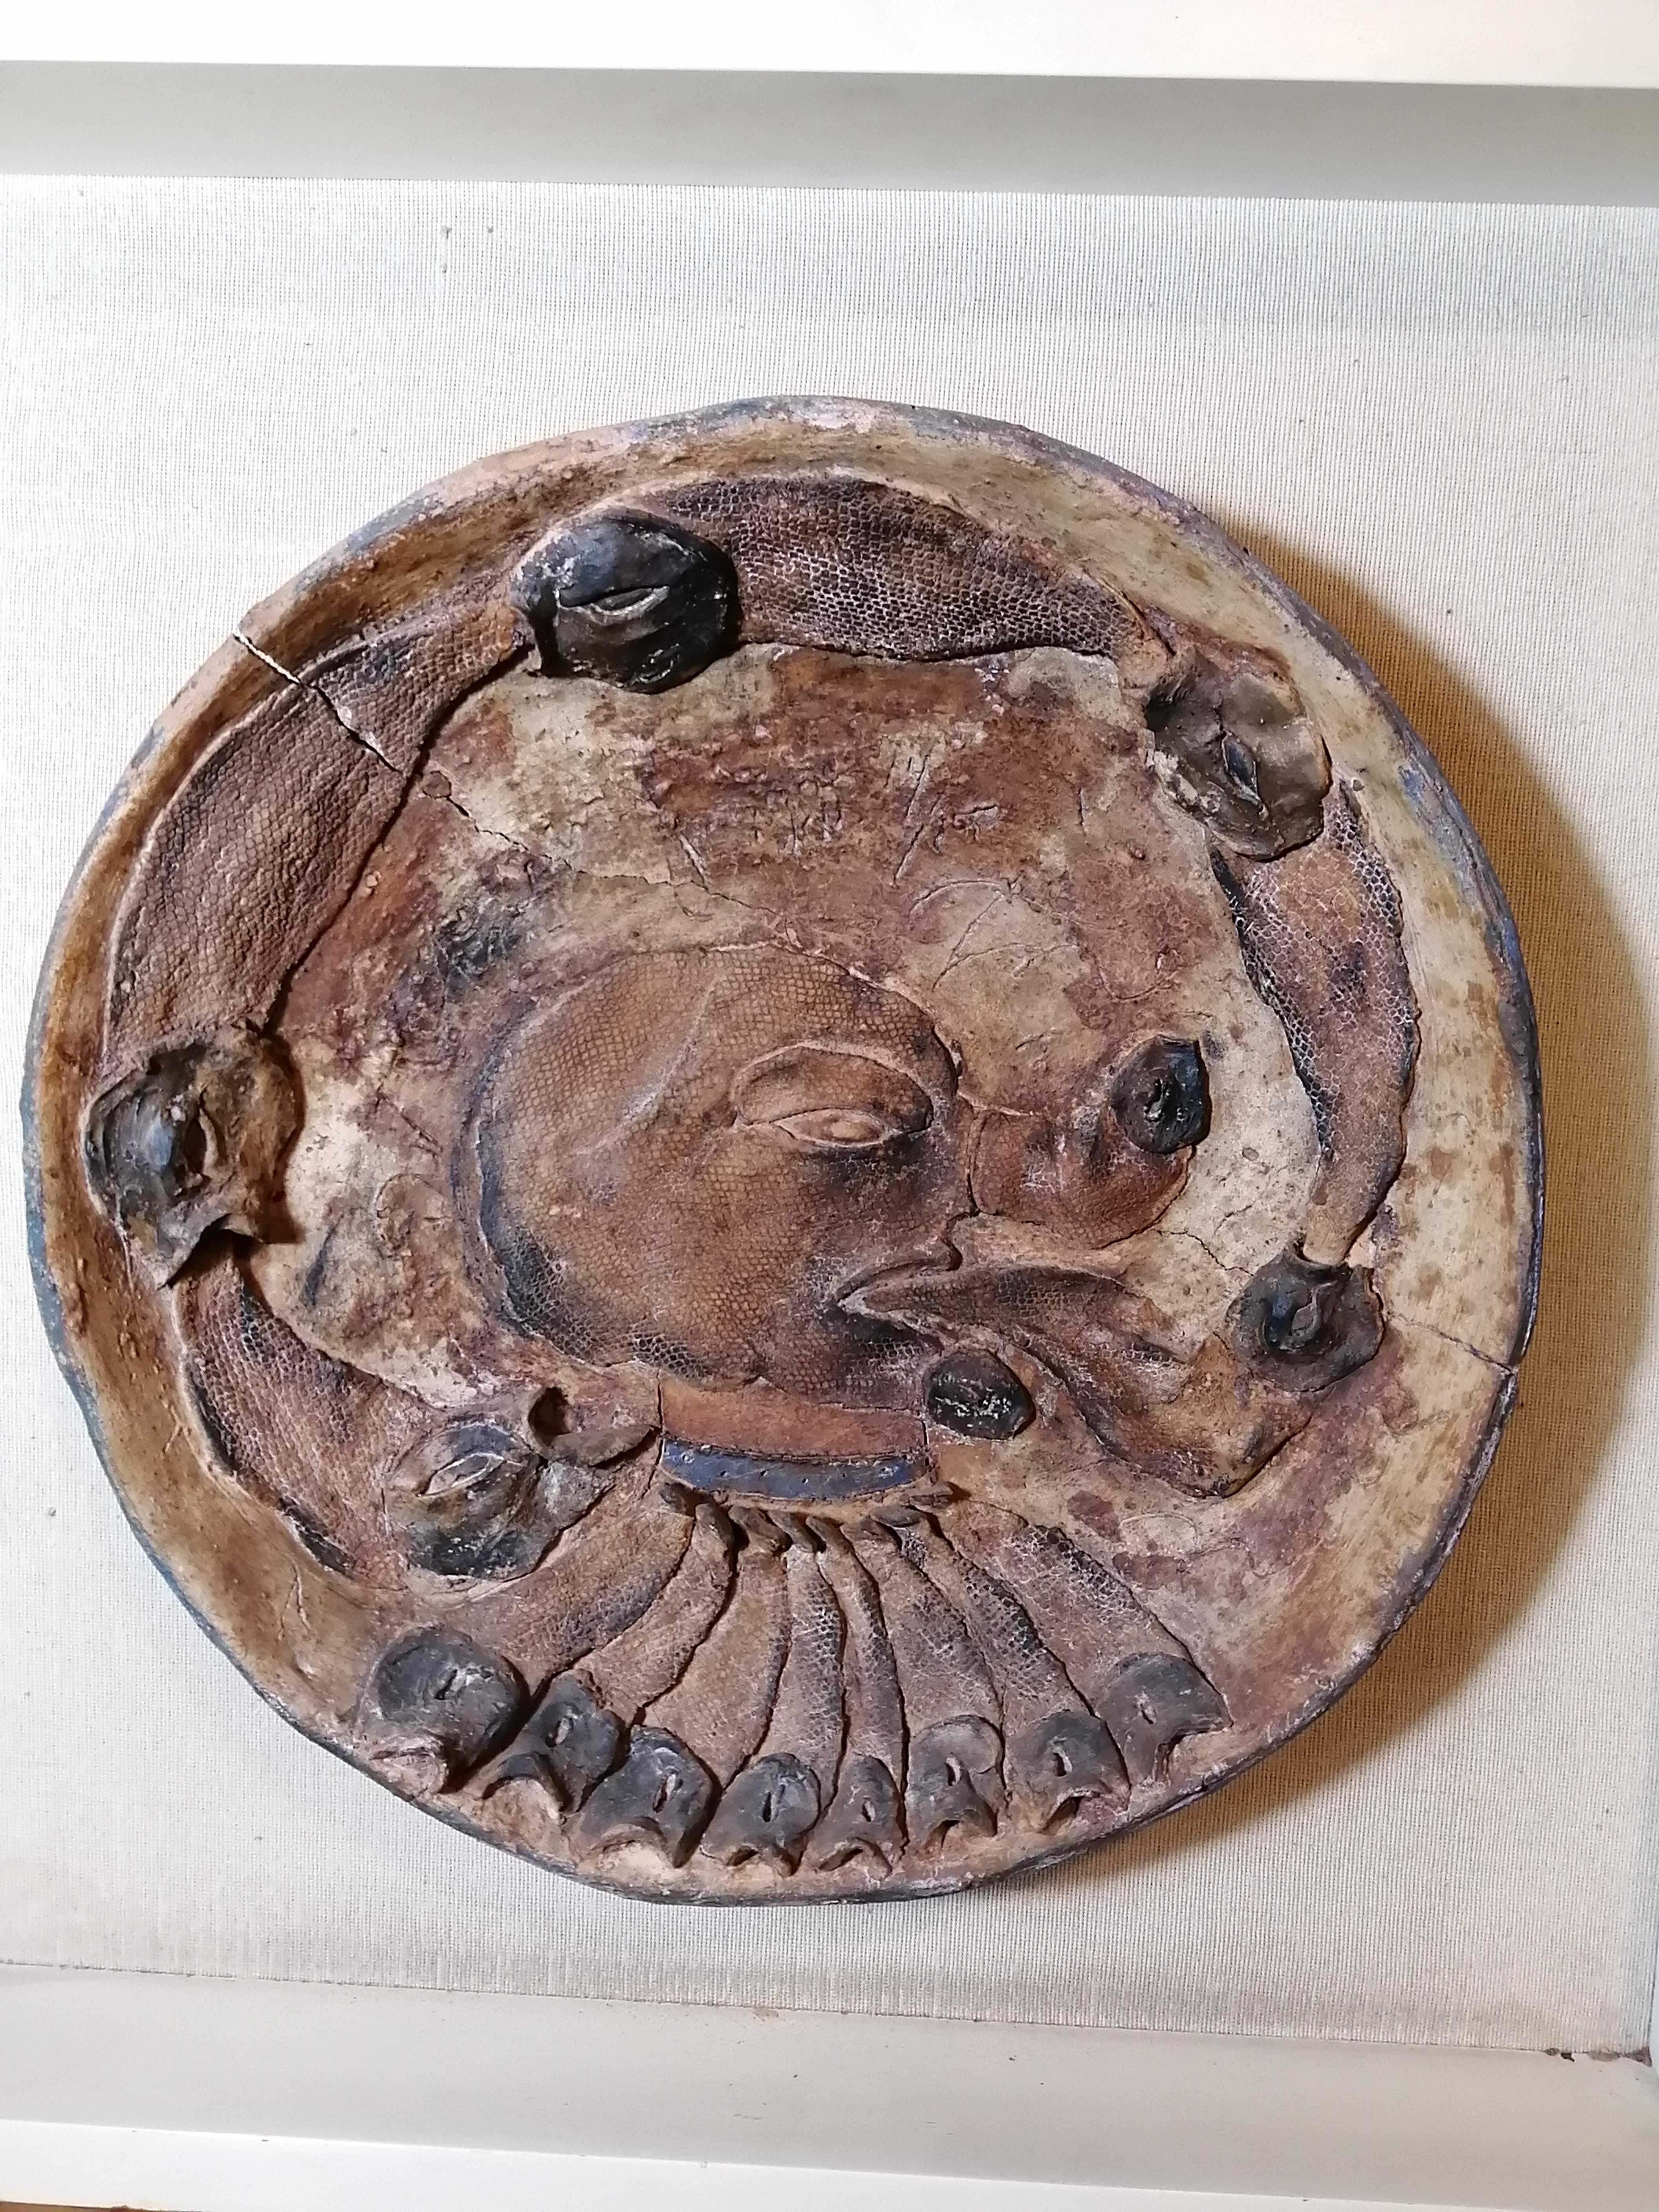 An important ceramic plate by Mexican artist Alejandro Colunga. Series 14 / 15. The plate is an assemble of different ceramic pieces depicting fish and a dog head. Signed and dated 1980.

Alejandro Colunga (b. 1948) is a Mexican painter and sculptor